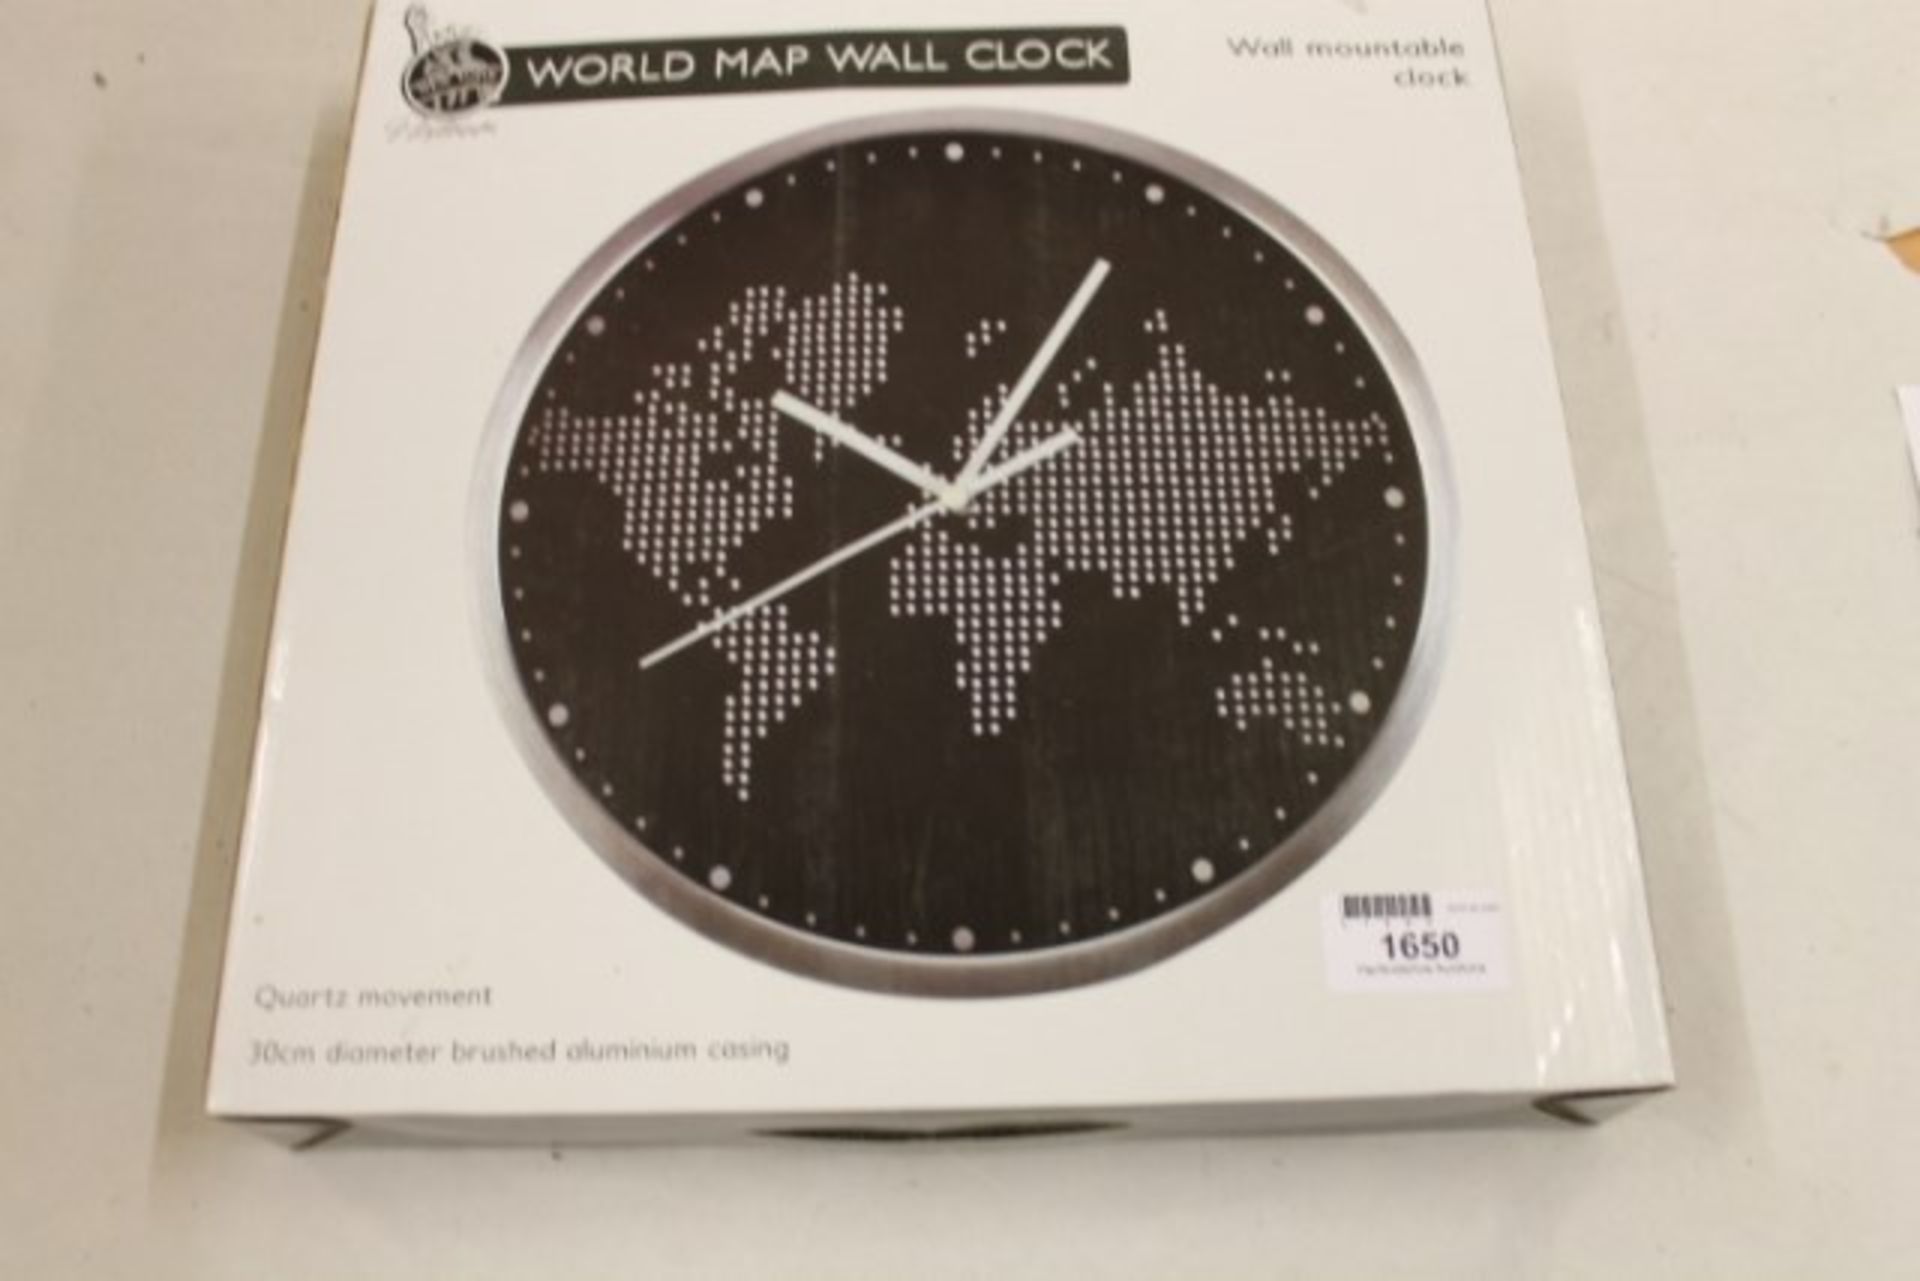 V Grade A Brushed Aluminium Cased 30cm World Map Wall Clock RRP39.99 X 2 YOUR BID PRICE TO BE